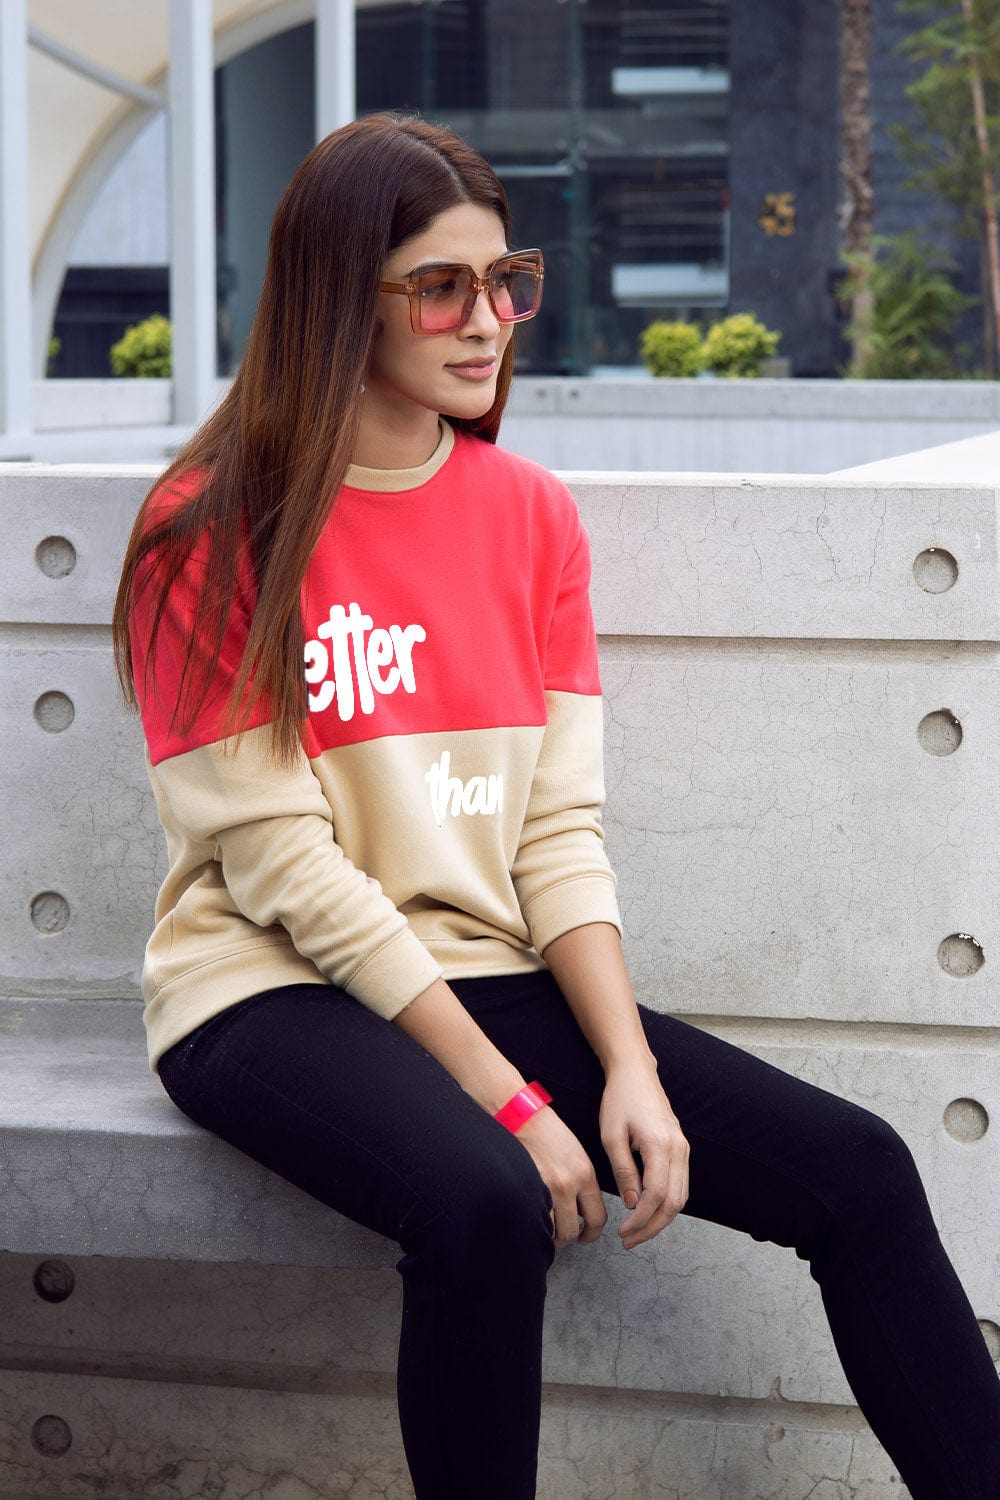 Hope Not Out by Shahid Afridi Women Sweat Shirt Color Blocking Sweat Shirt